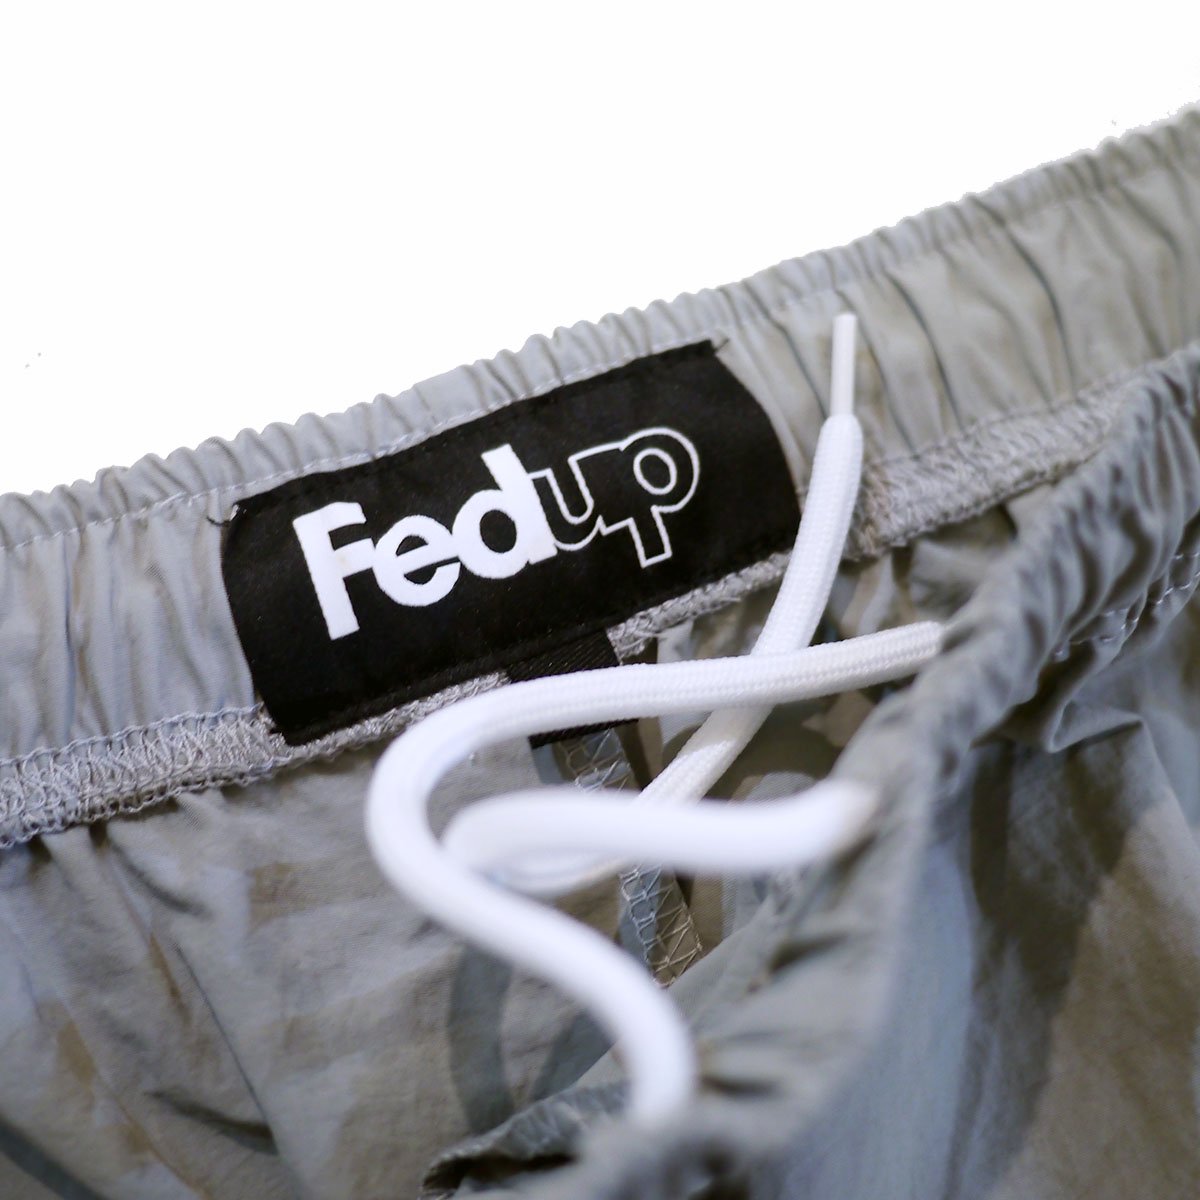 Fedup | HIPHOP WEAR | <img class='new_mark_img1' src='https://img.shop-pro.jp/img/new/icons21.gif' style='border:none;display:inline;margin:0px;padding:0px;width:auto;' />Fedup 